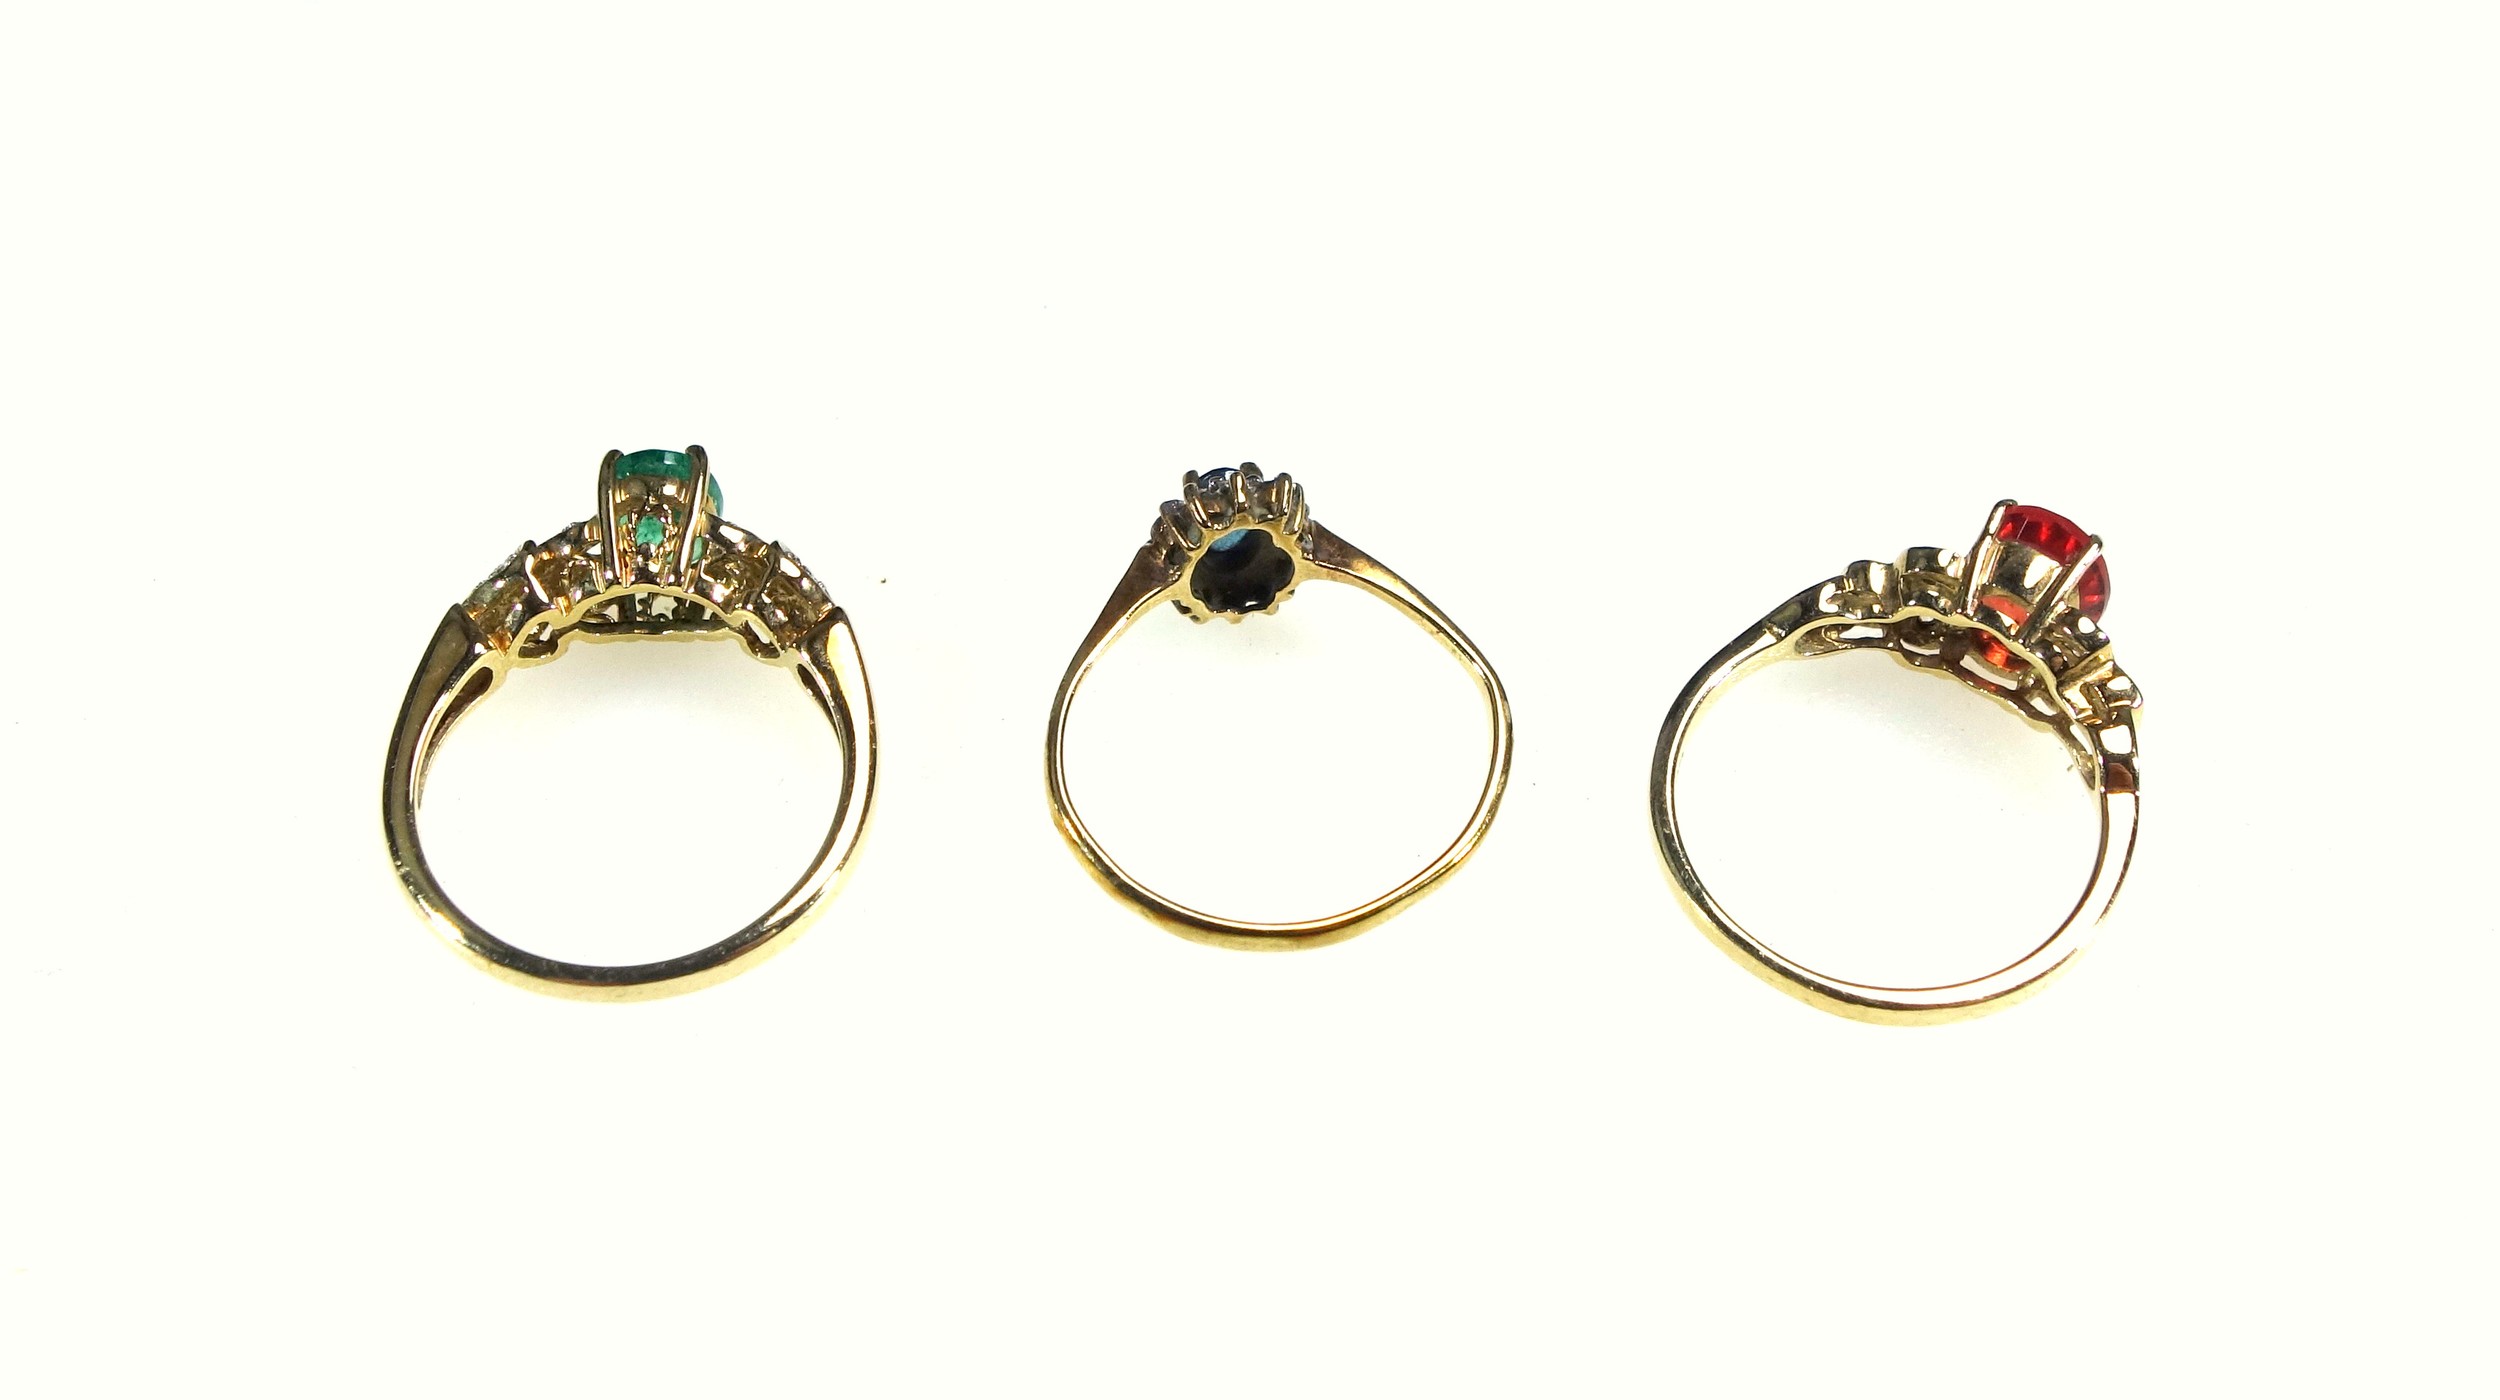 9ct gold ring set topaz and 6 diamonds, 9ct ring set pale green stone and brilliants, and a 9ct ring - Image 2 of 5